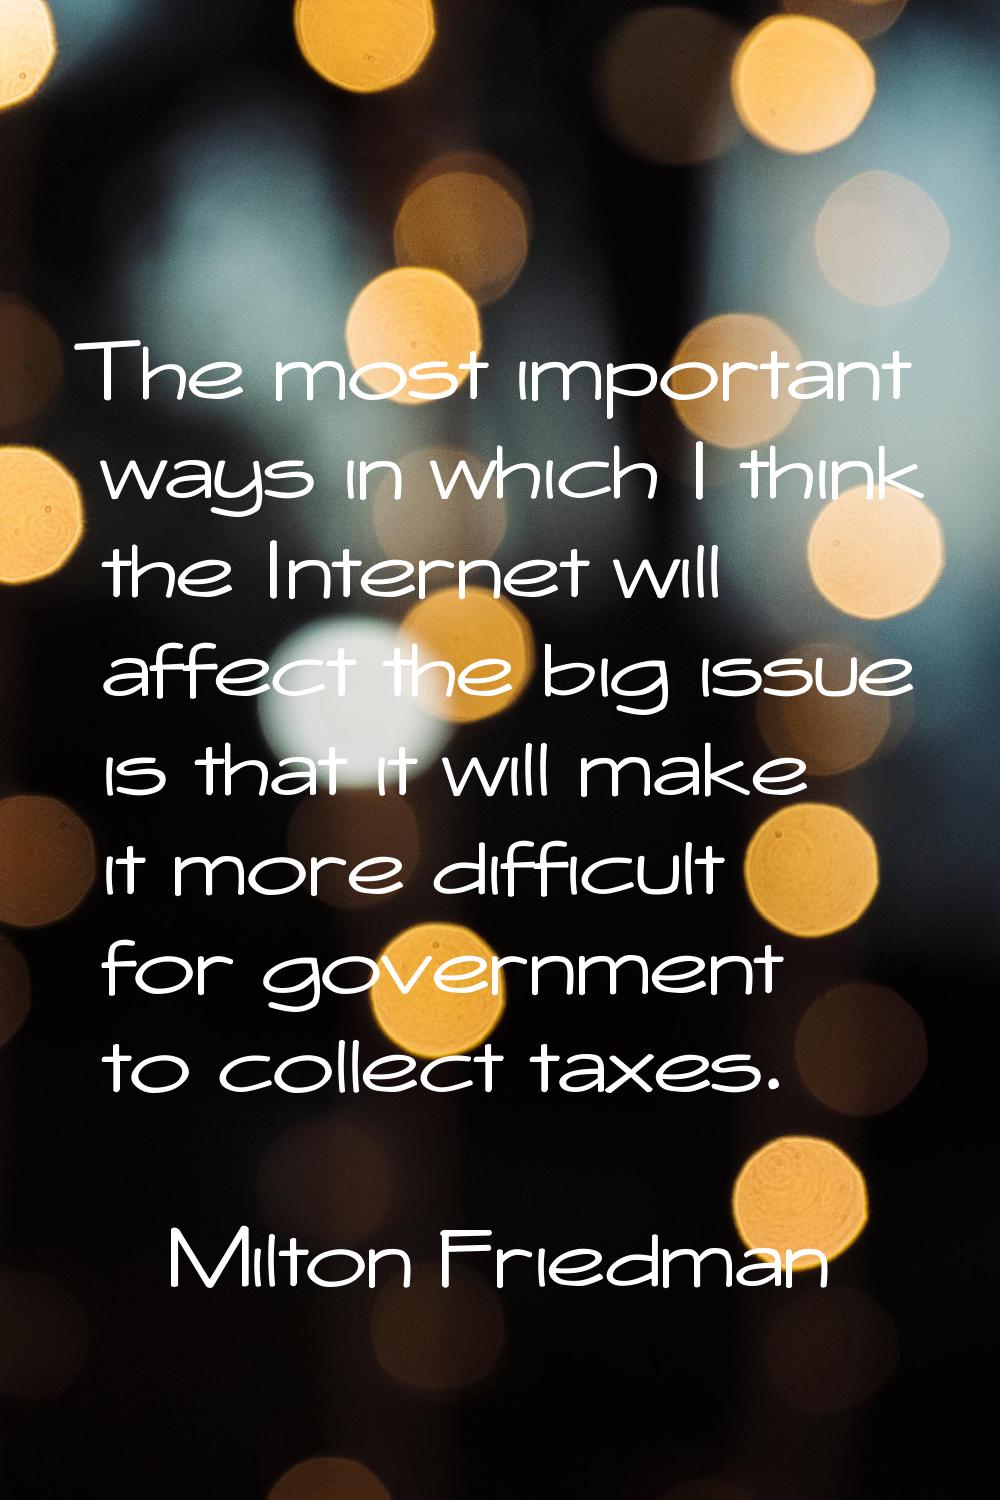 The most important ways in which I think the Internet will affect the big issue is that it will mak